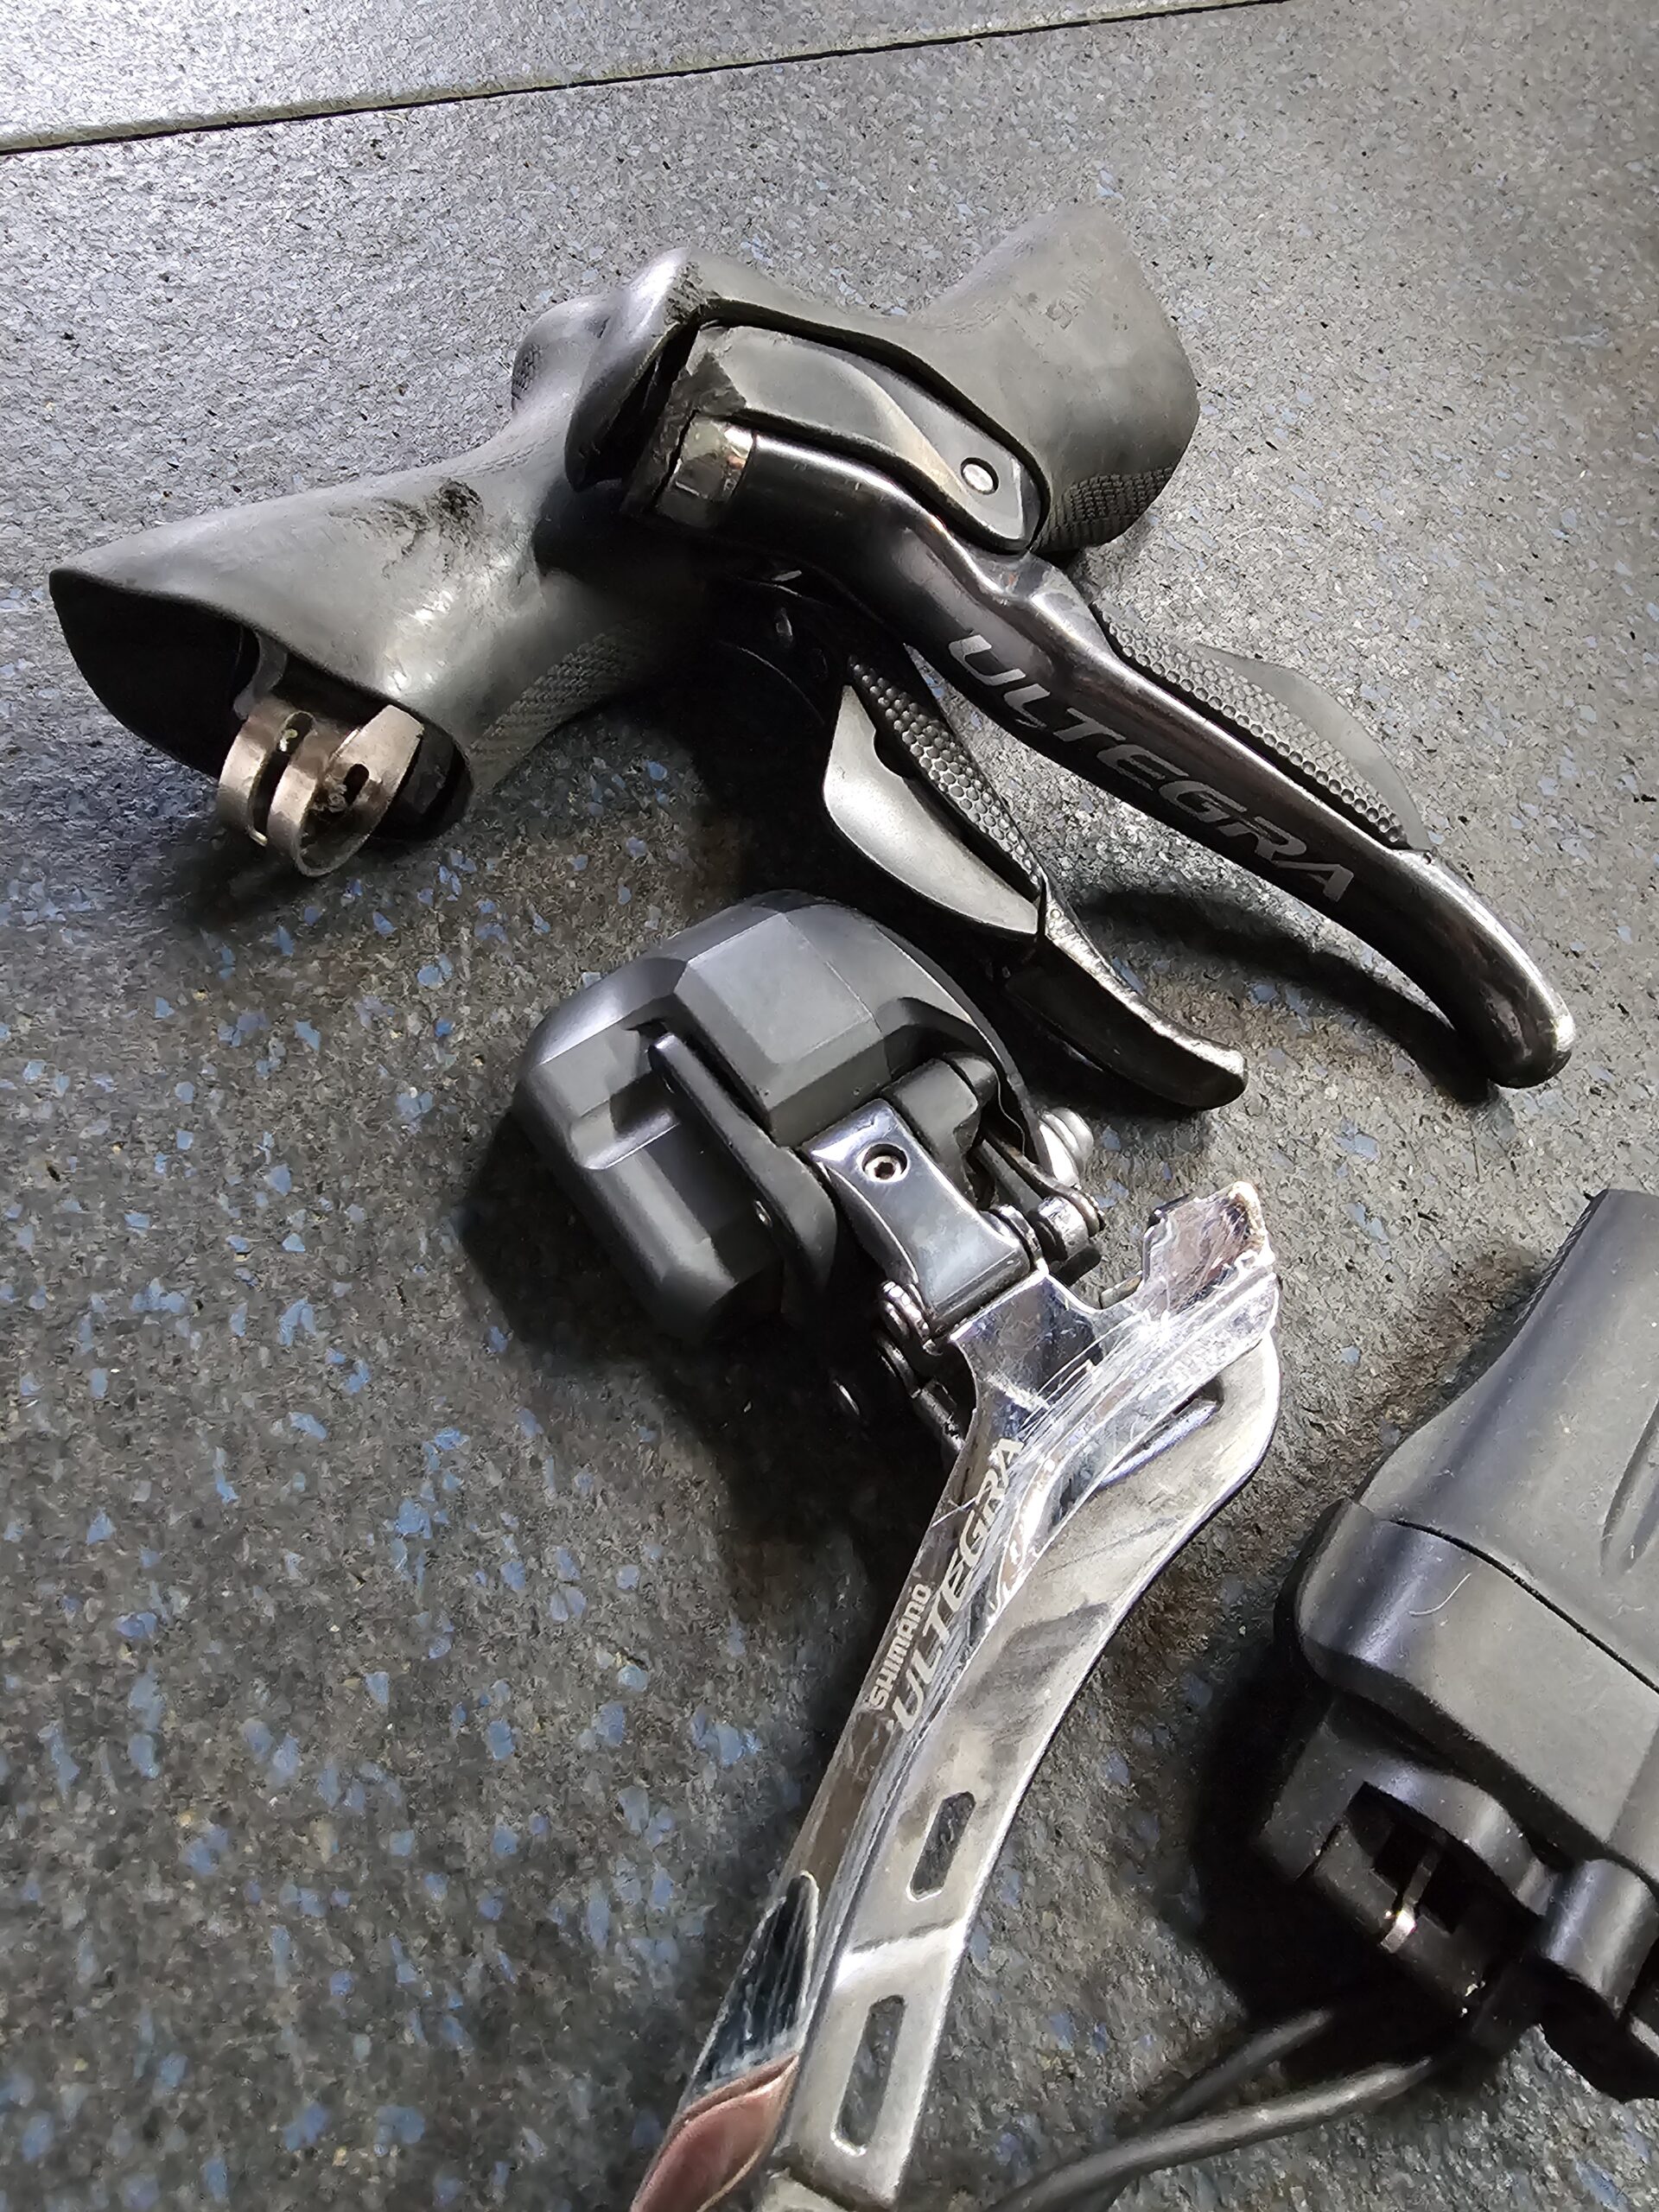 Old Ultegra but maybe useful, Postage + a donation to charity